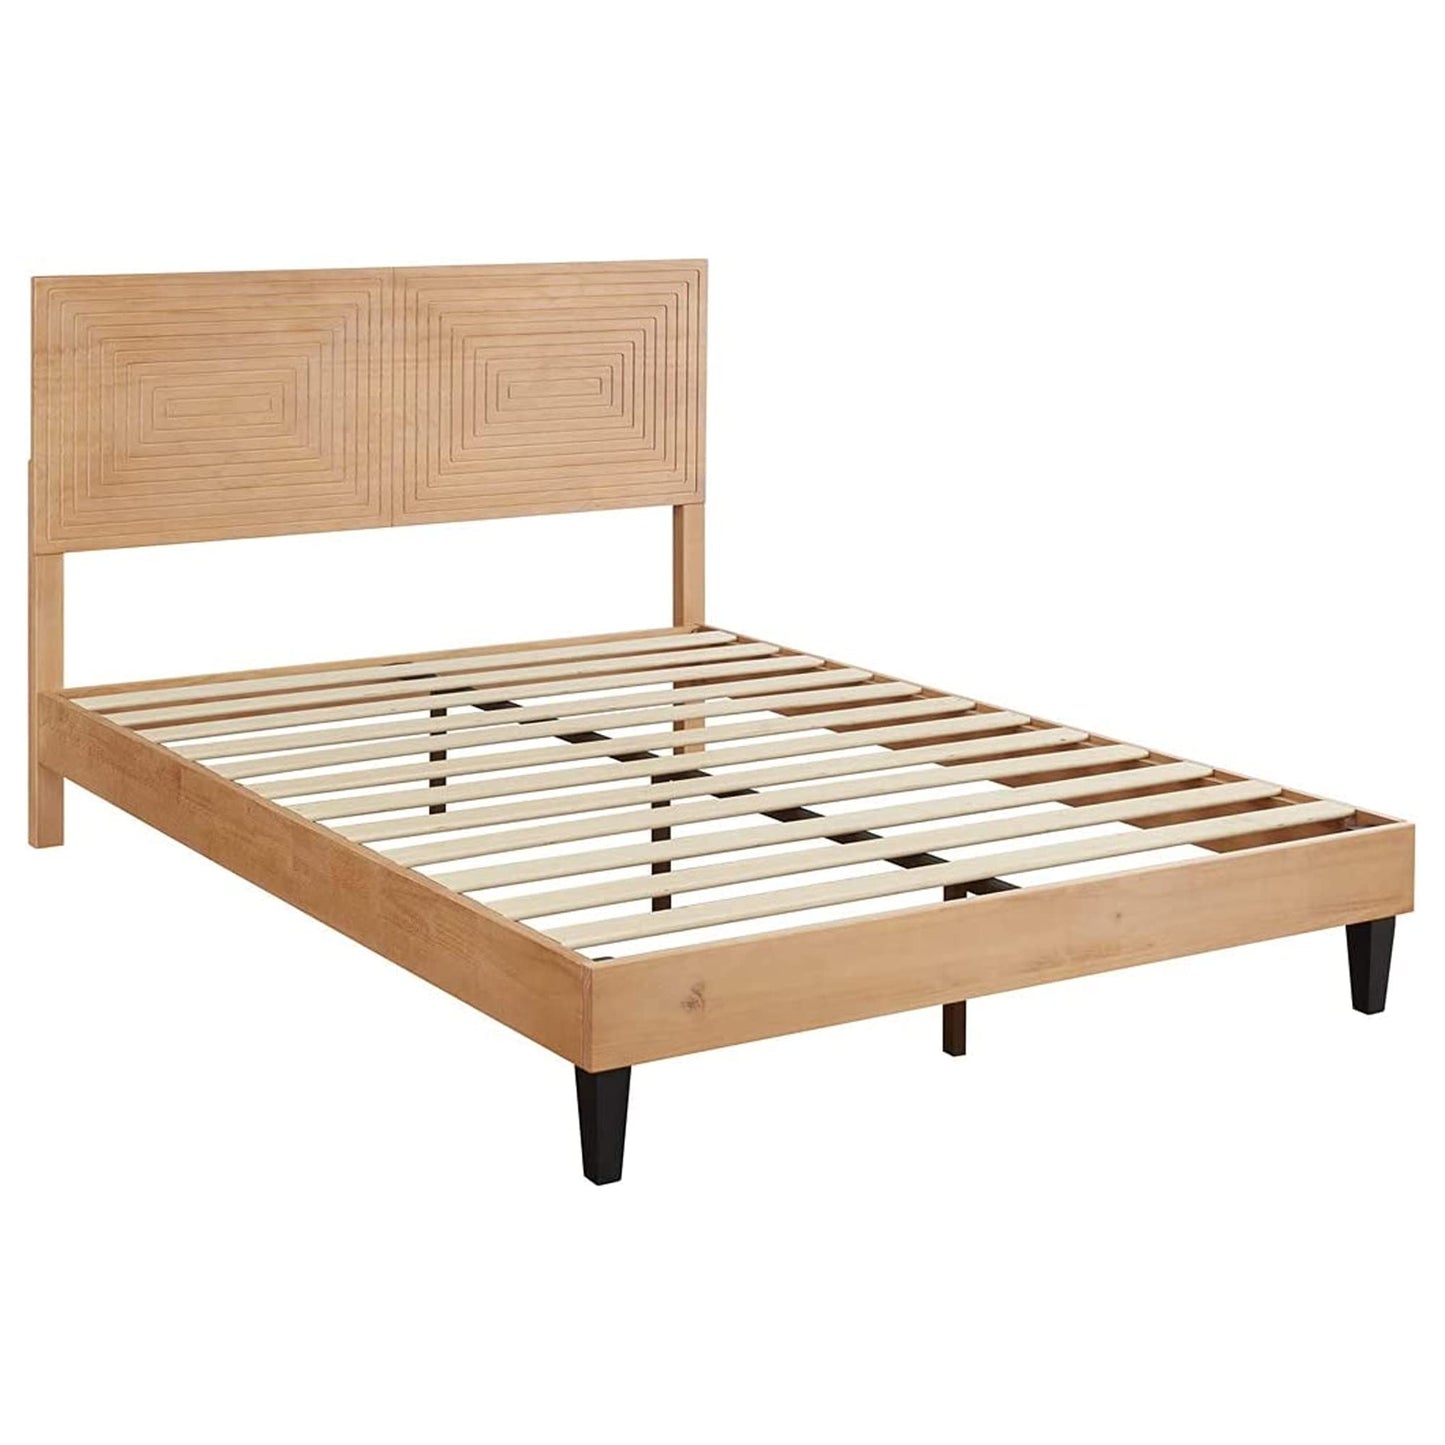 MUSEHOMEINC Mid Century Modern Solid Wood Platform Bed,Full Size Bed Frame with Adjustable Height Headboard, Wood Slat Support Bed Frame, Bed Frame No Box Spring Needed